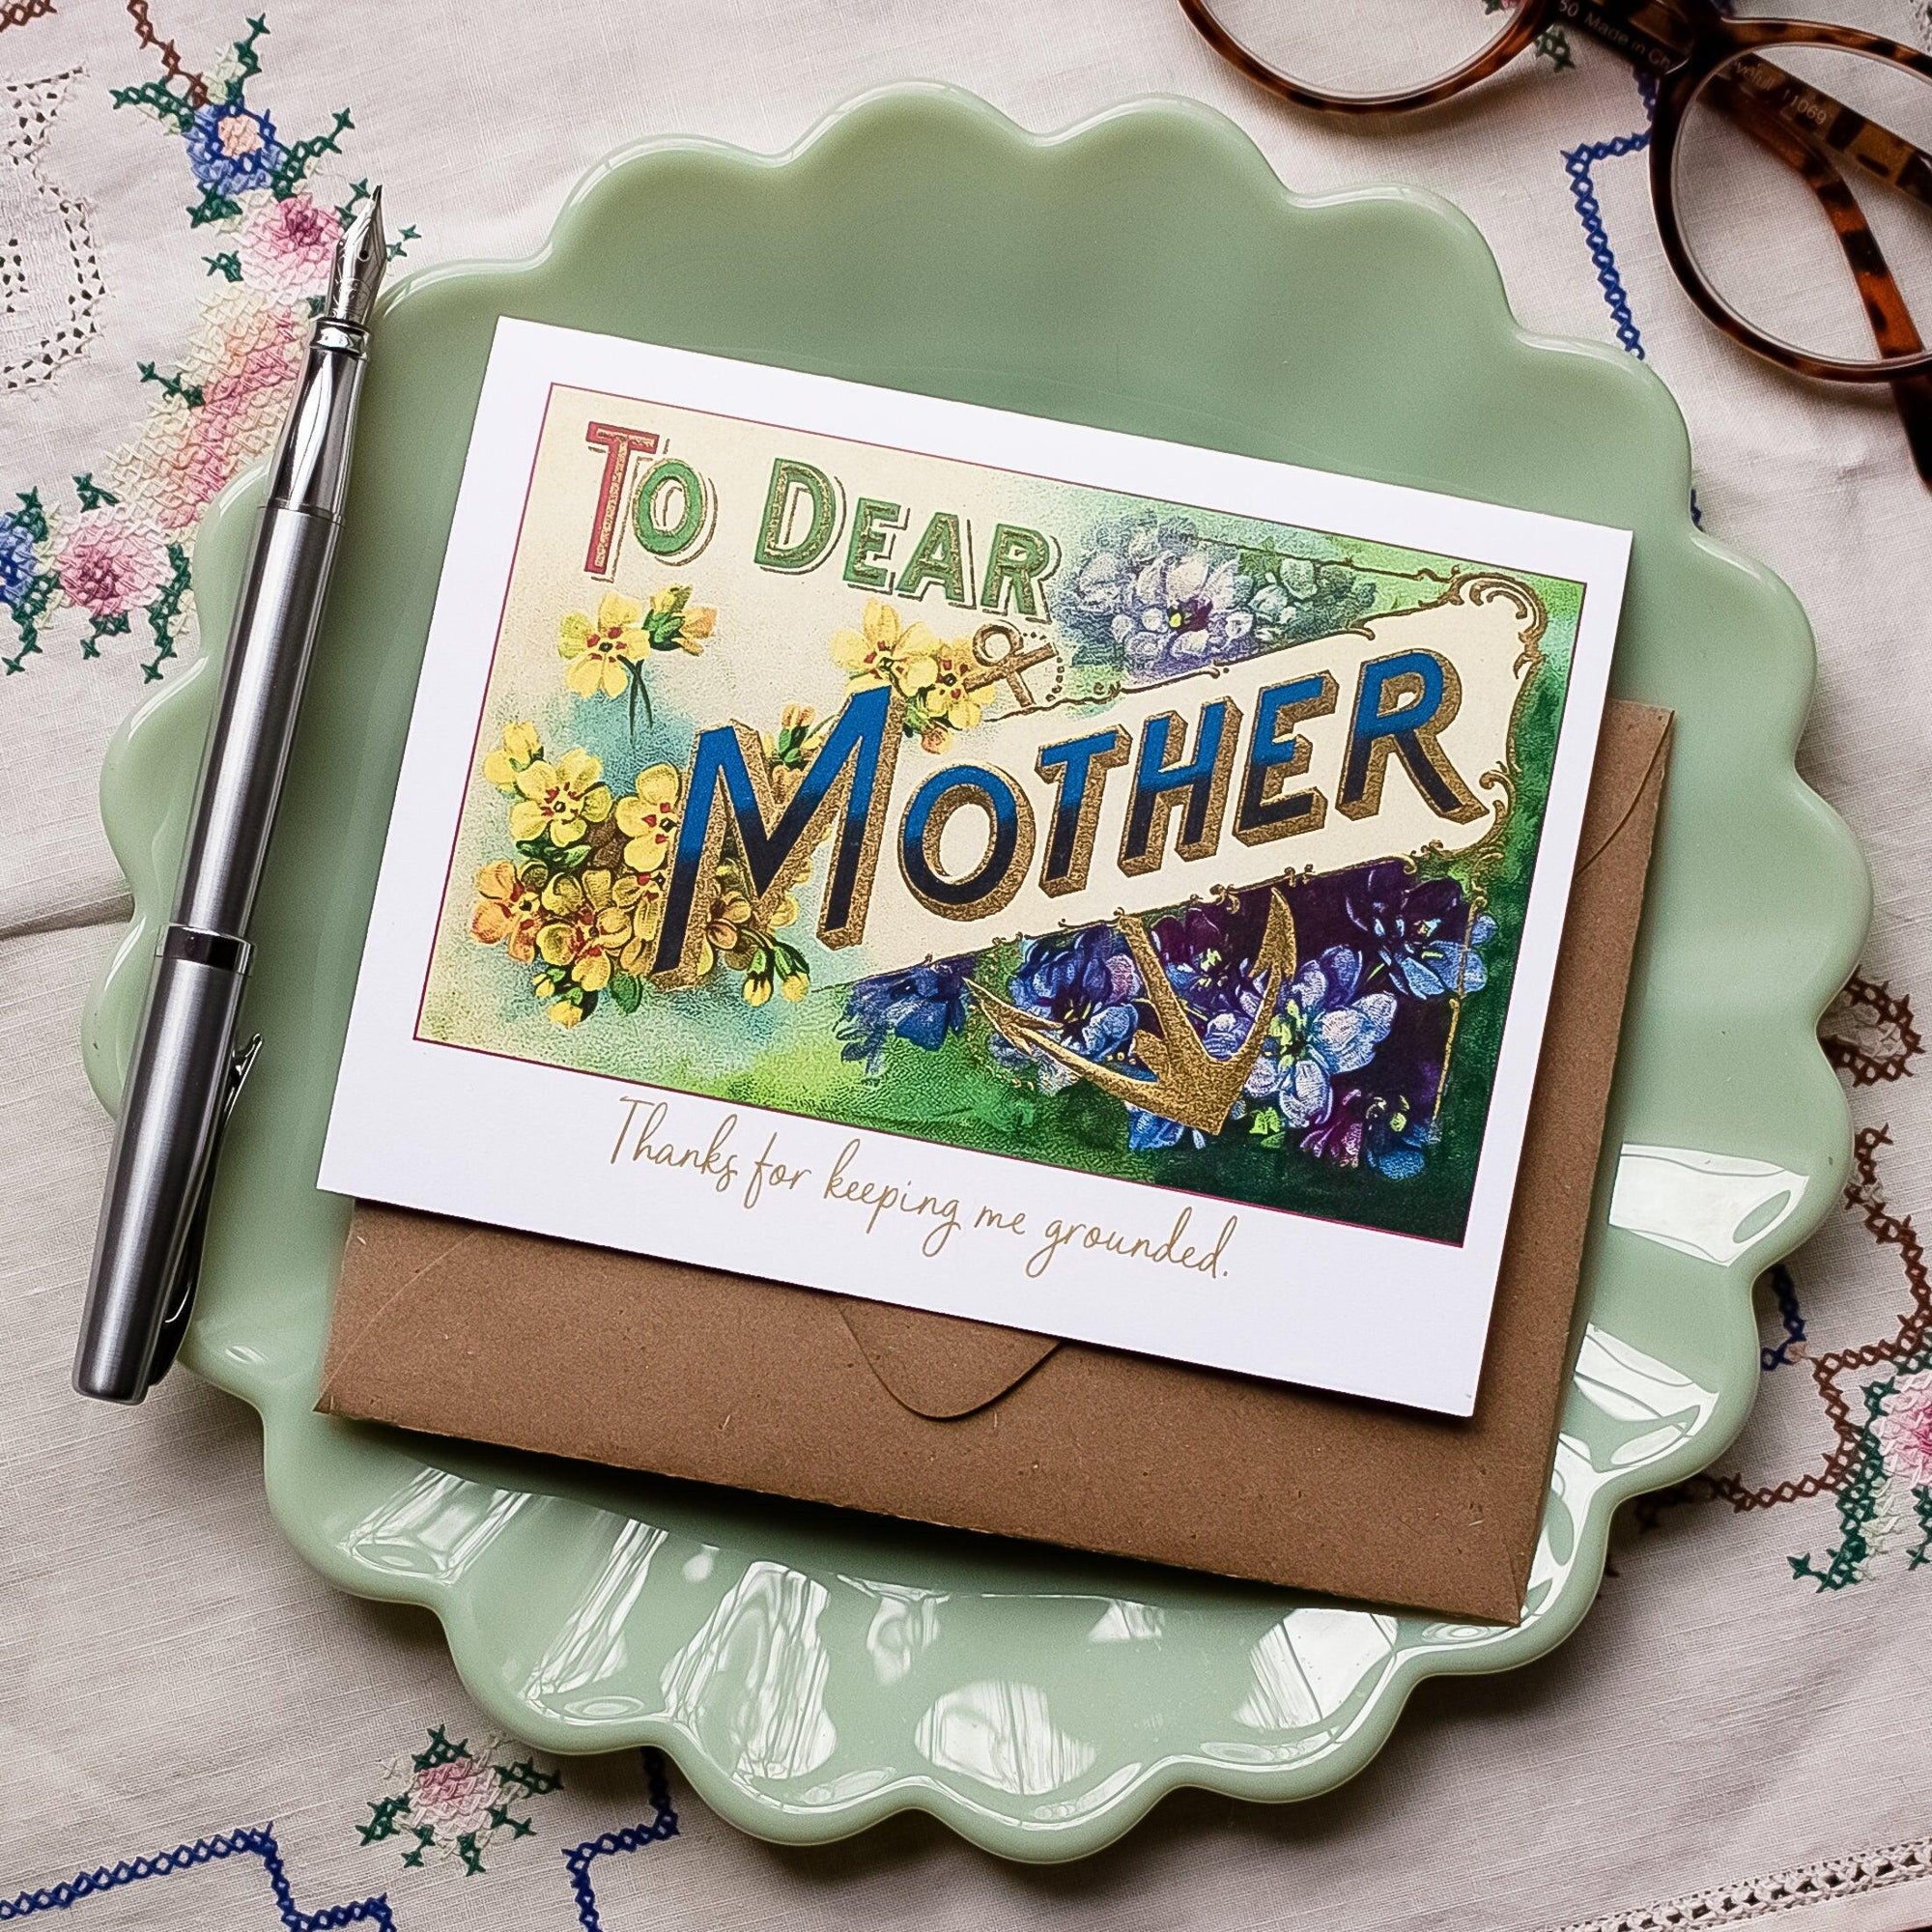 Mother's Day Card - To Dear Mother - Vintage Floral and Anchor Mothers Day Card - Thanks for Keeping Me Grounded Mom Card for Mother's Day